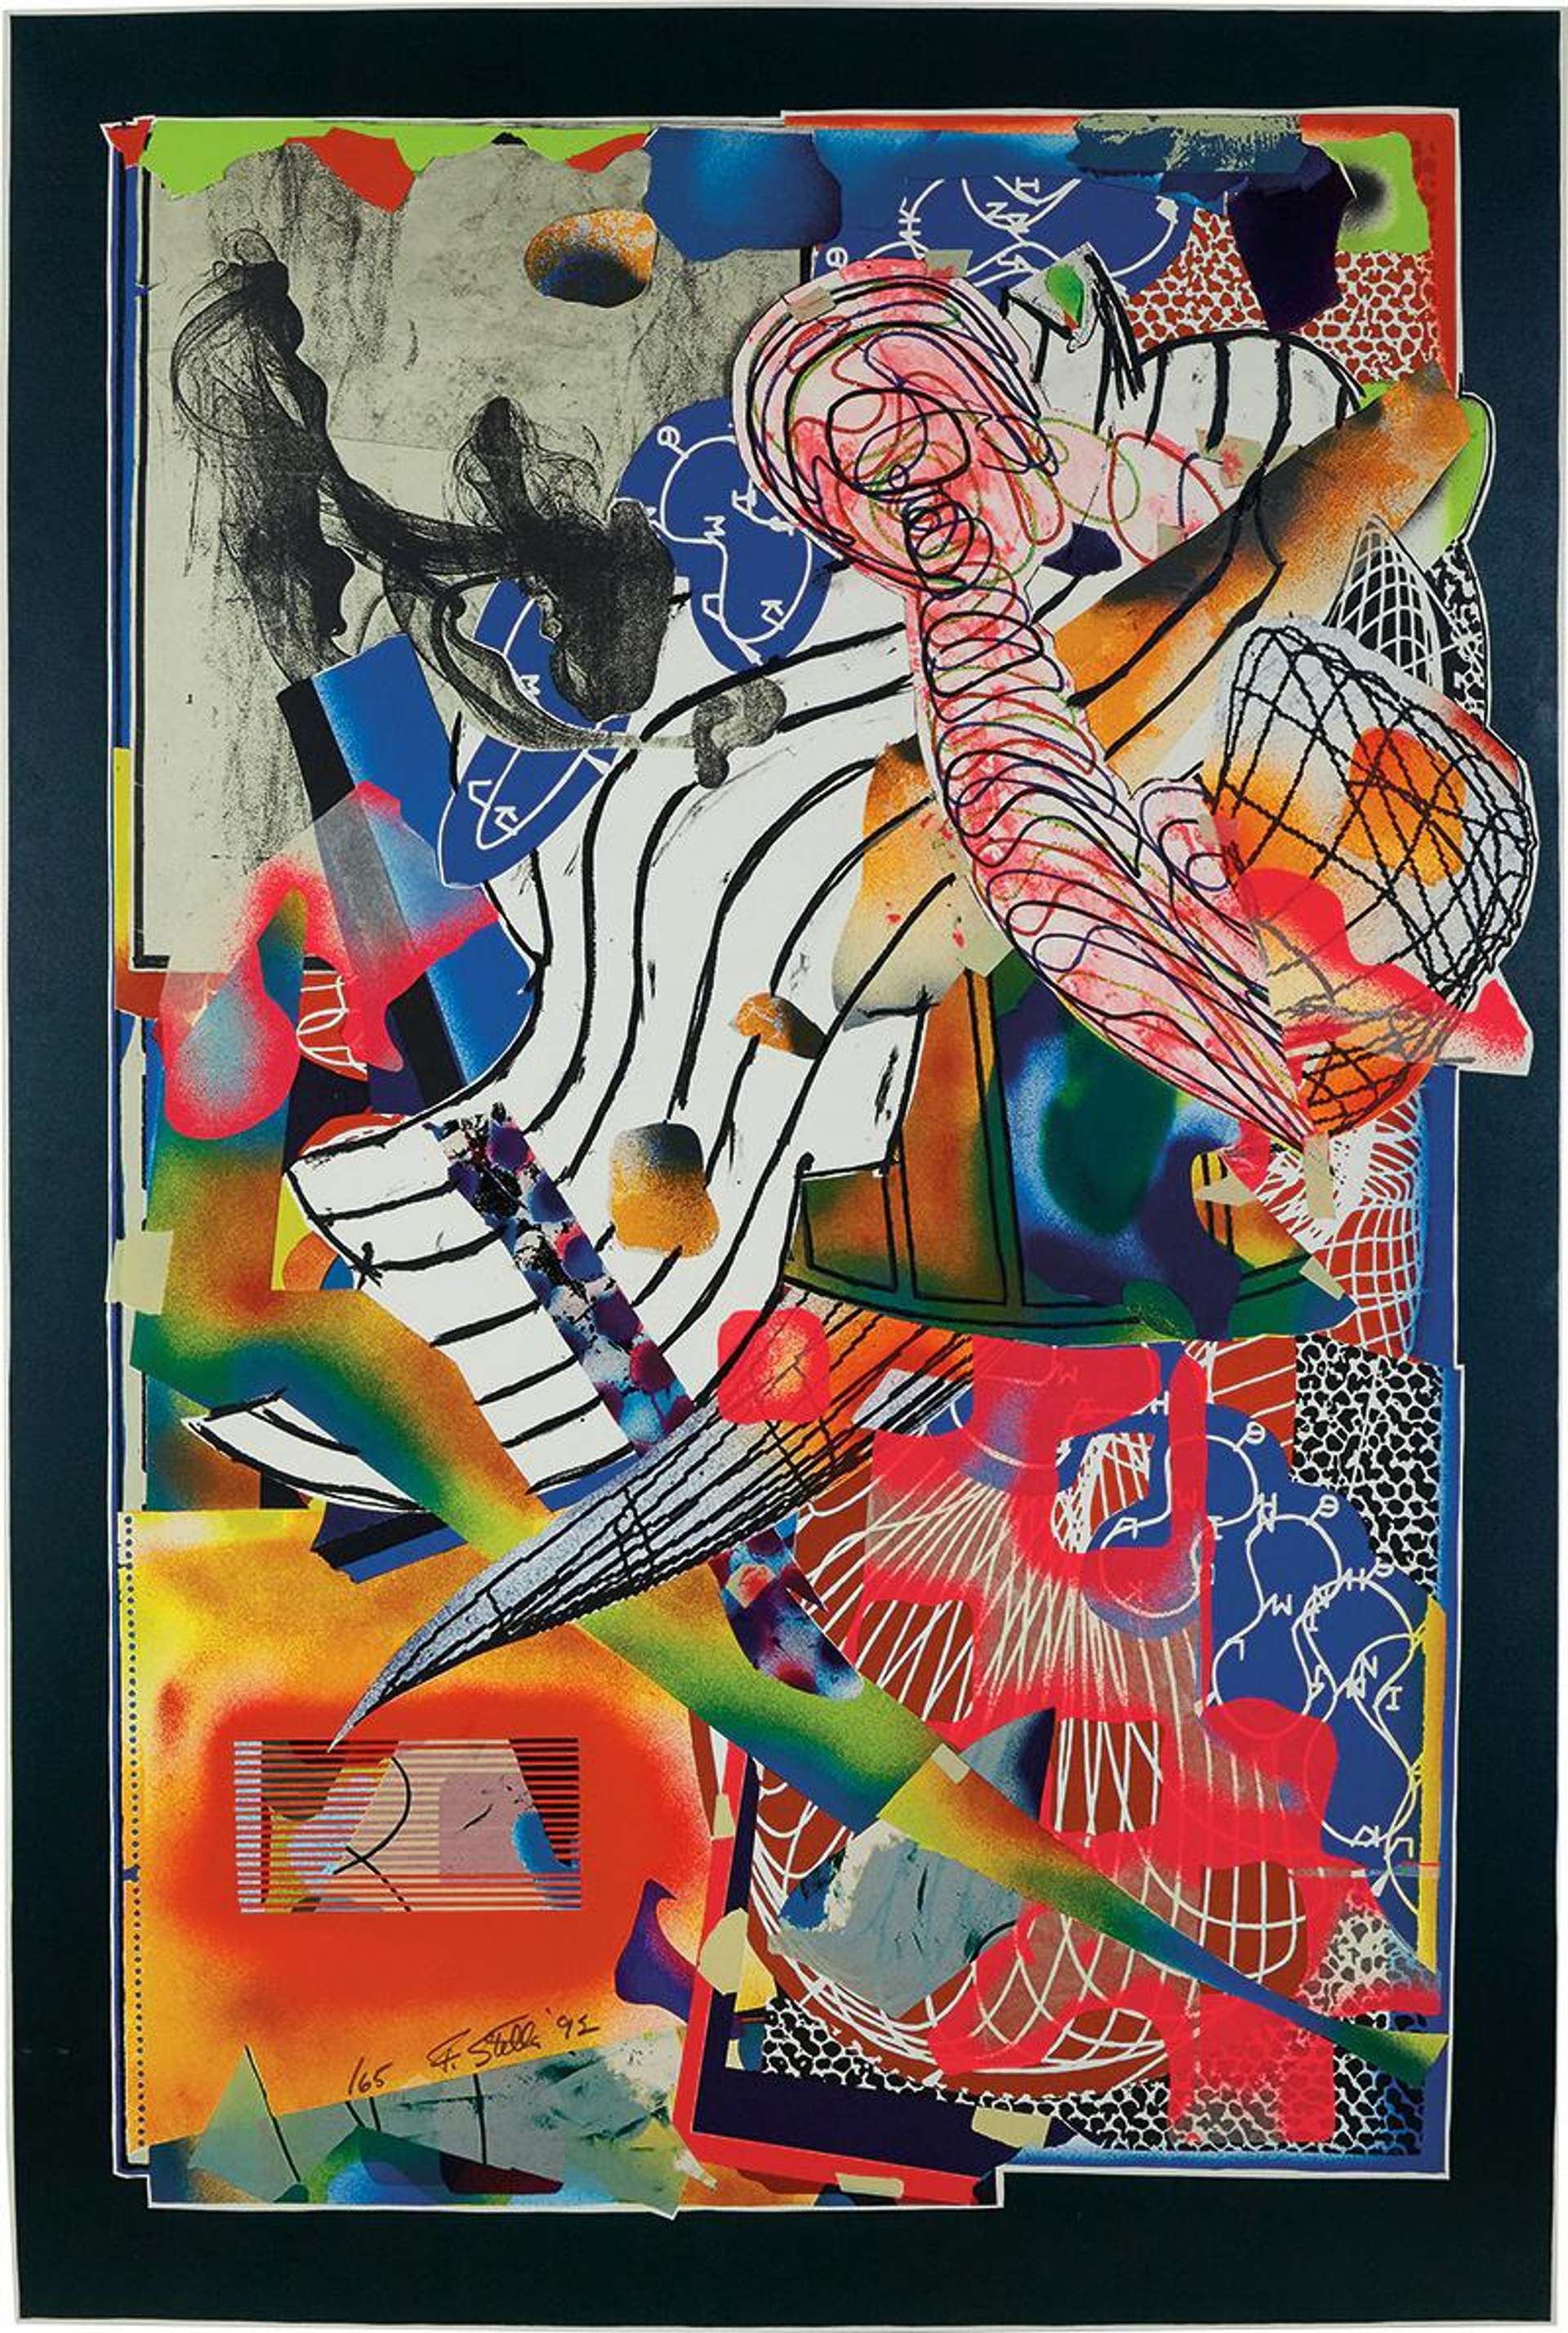 The Candles - Signed Print by Frank Stella 1992 - MyArtBroker